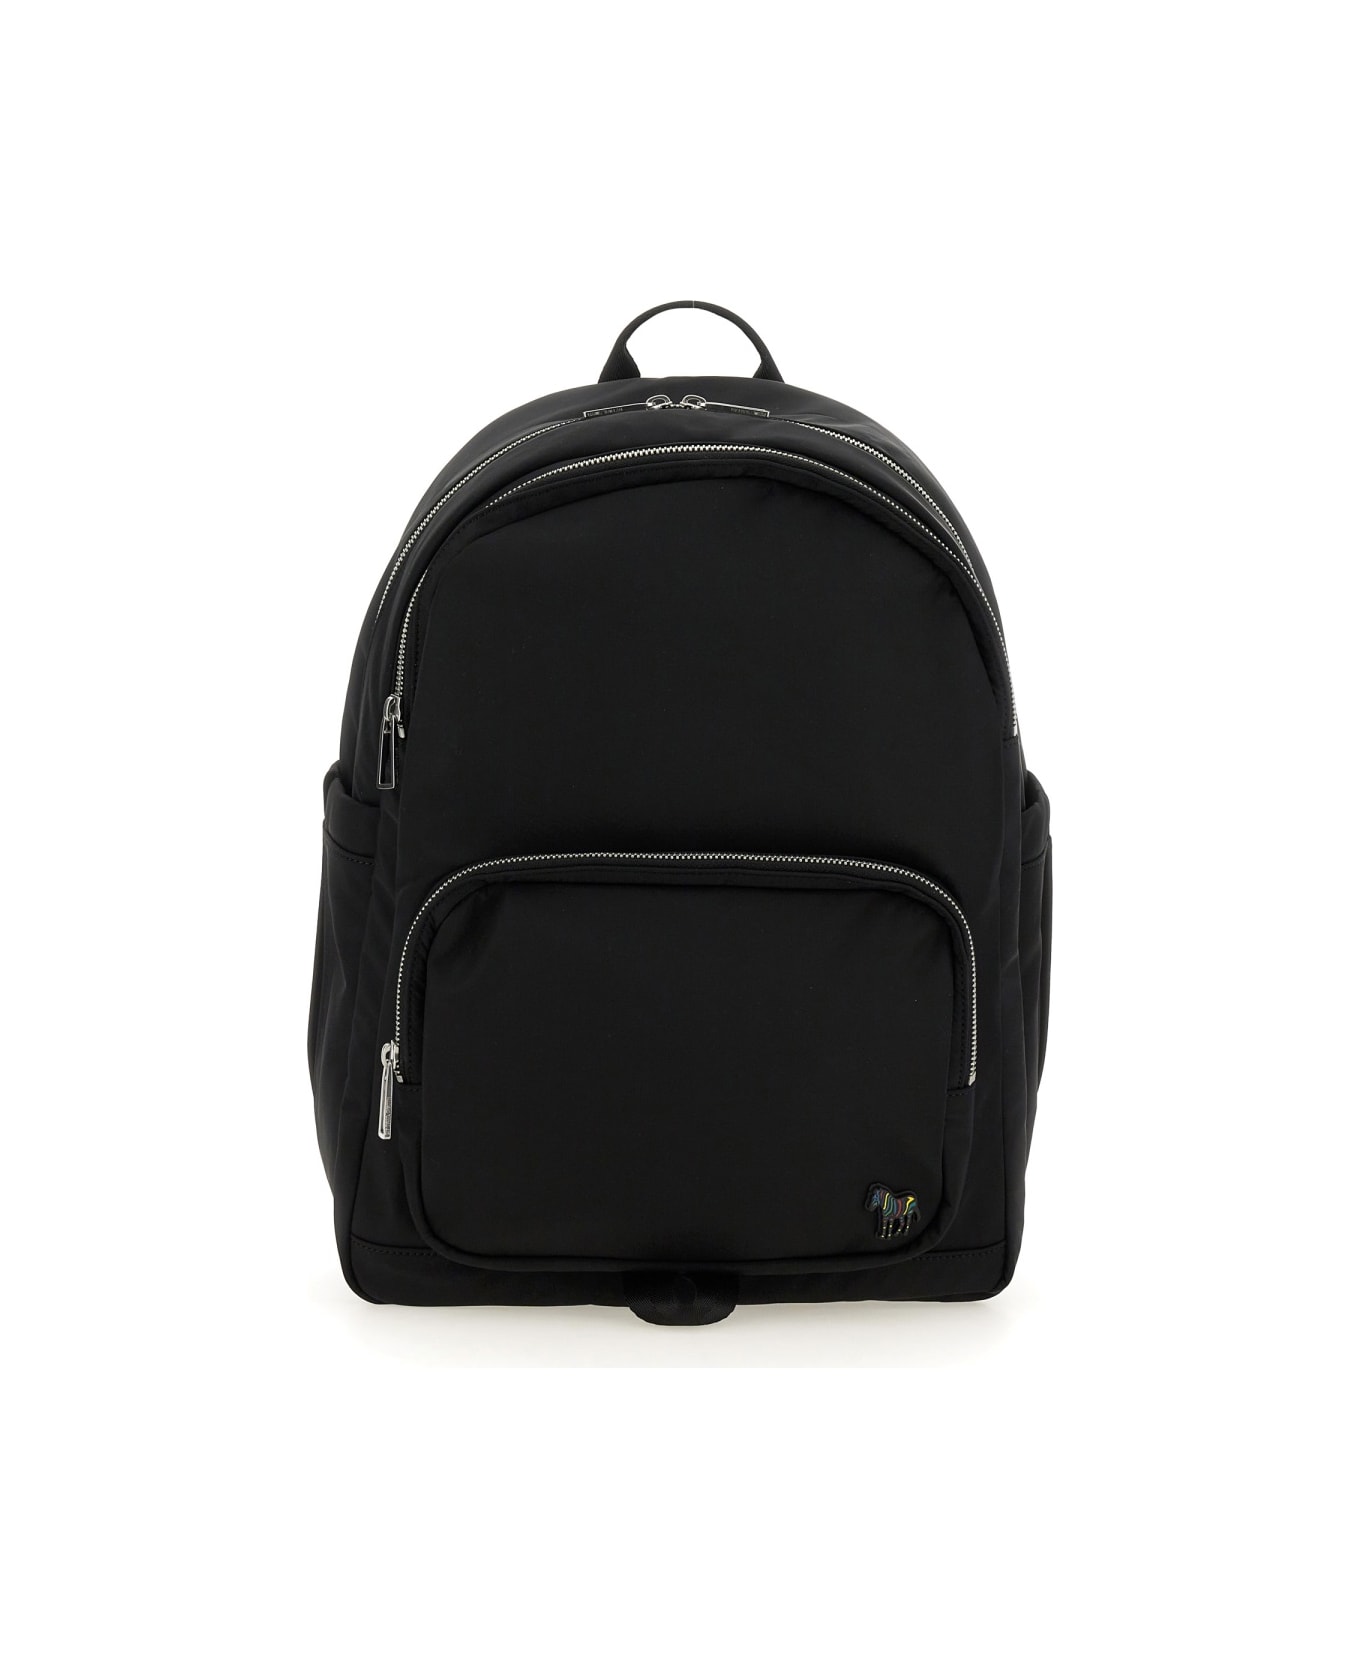 PS by Paul Smith Nylon Backpack - BLACK